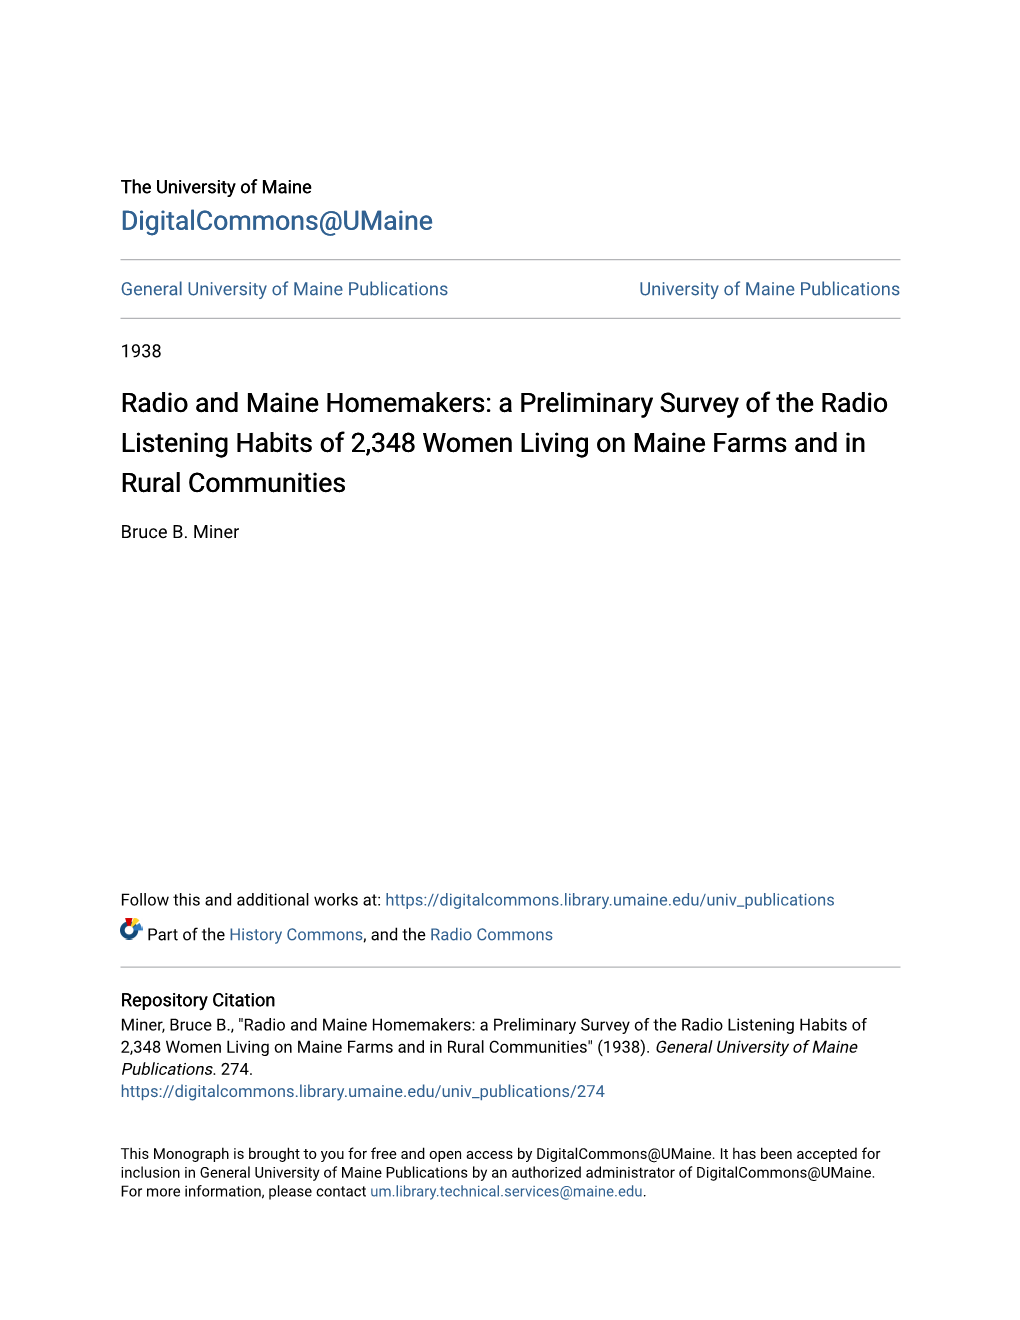 Radio and Maine Homemakers: a Preliminary Survey of the Radio Listening Habits of 2,348 Women Living on Maine Farms and in Rural Communities